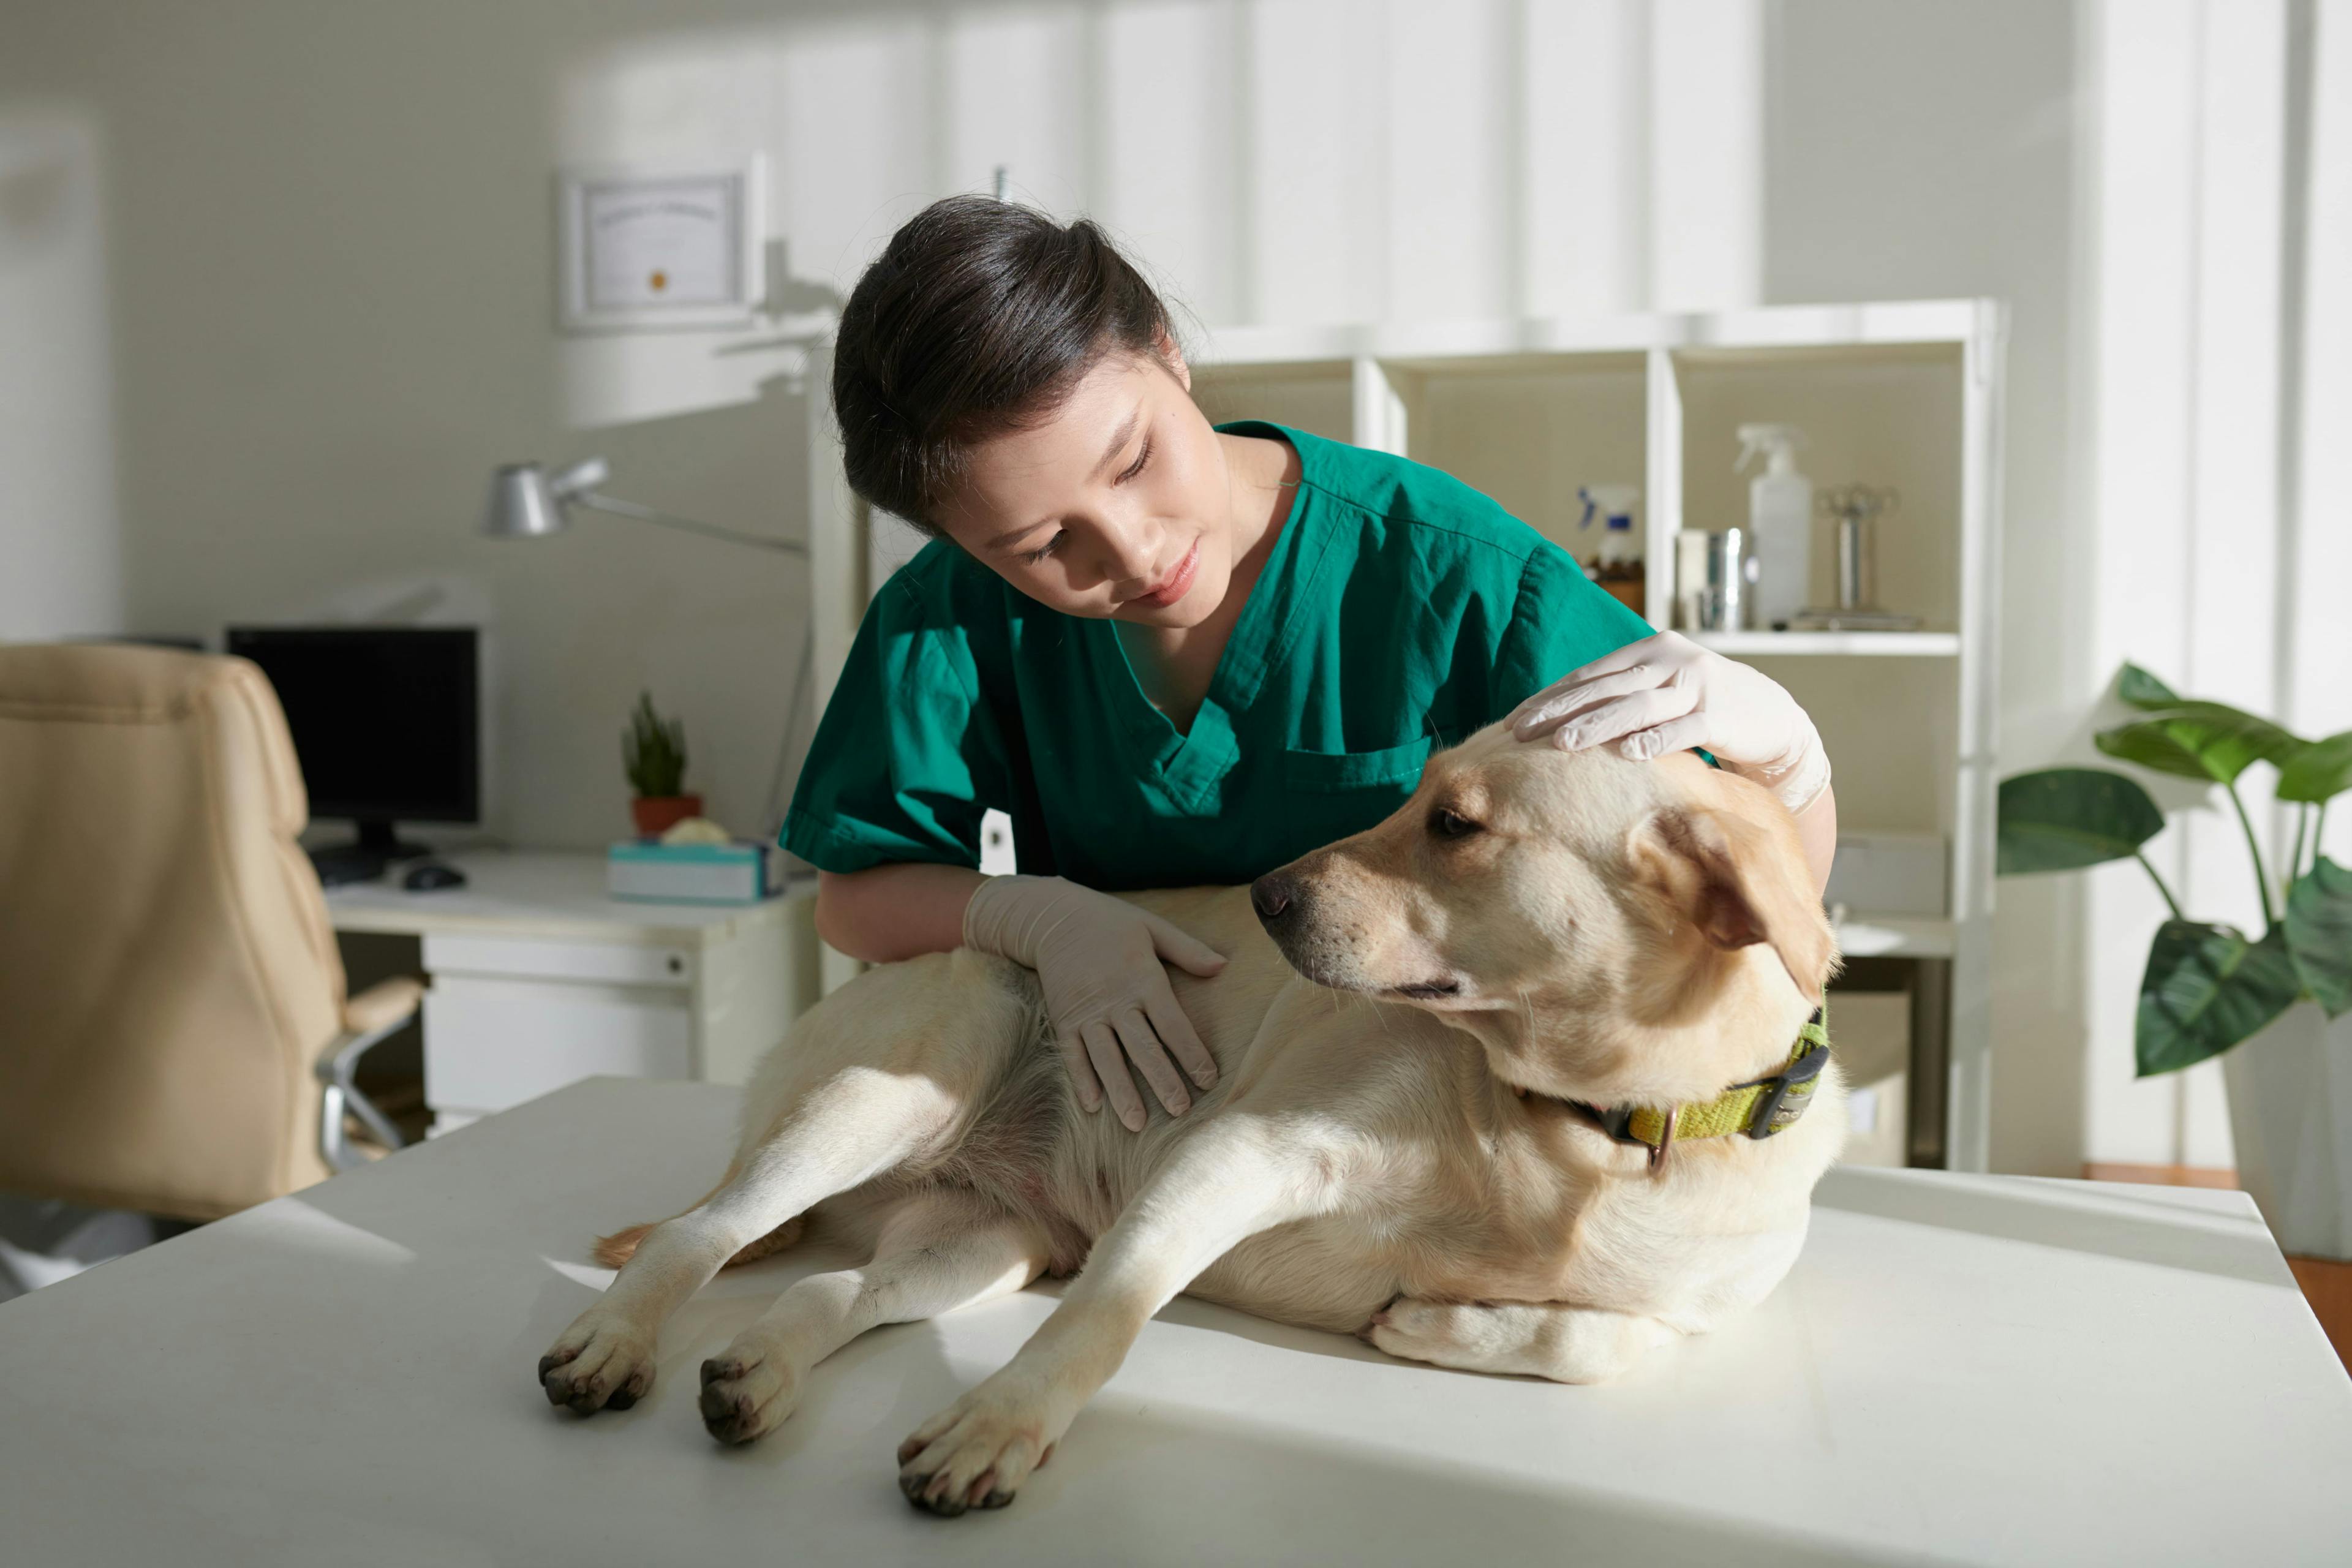 veterinary technician with dog / DragonImages / stock.adobe.com